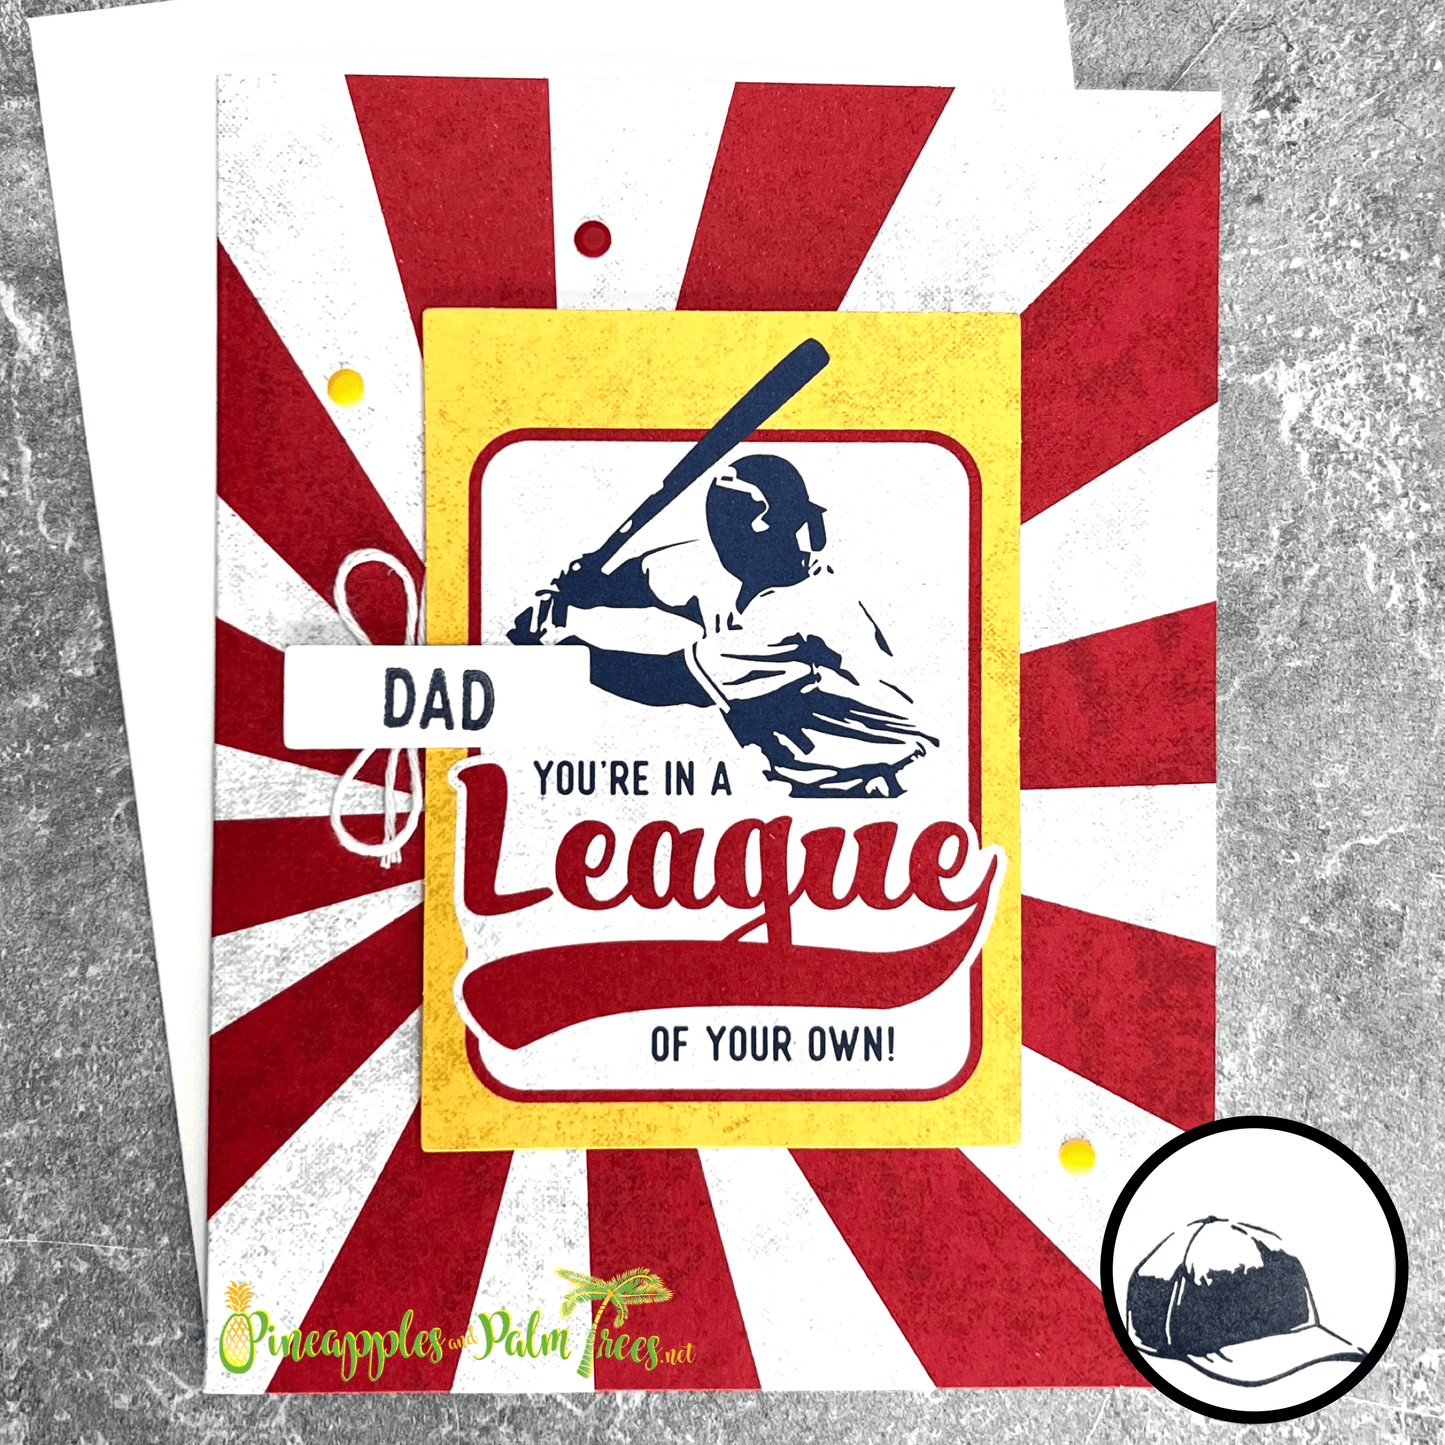 Greeting Card: Dad, You're in a League of Your Own! - baseball